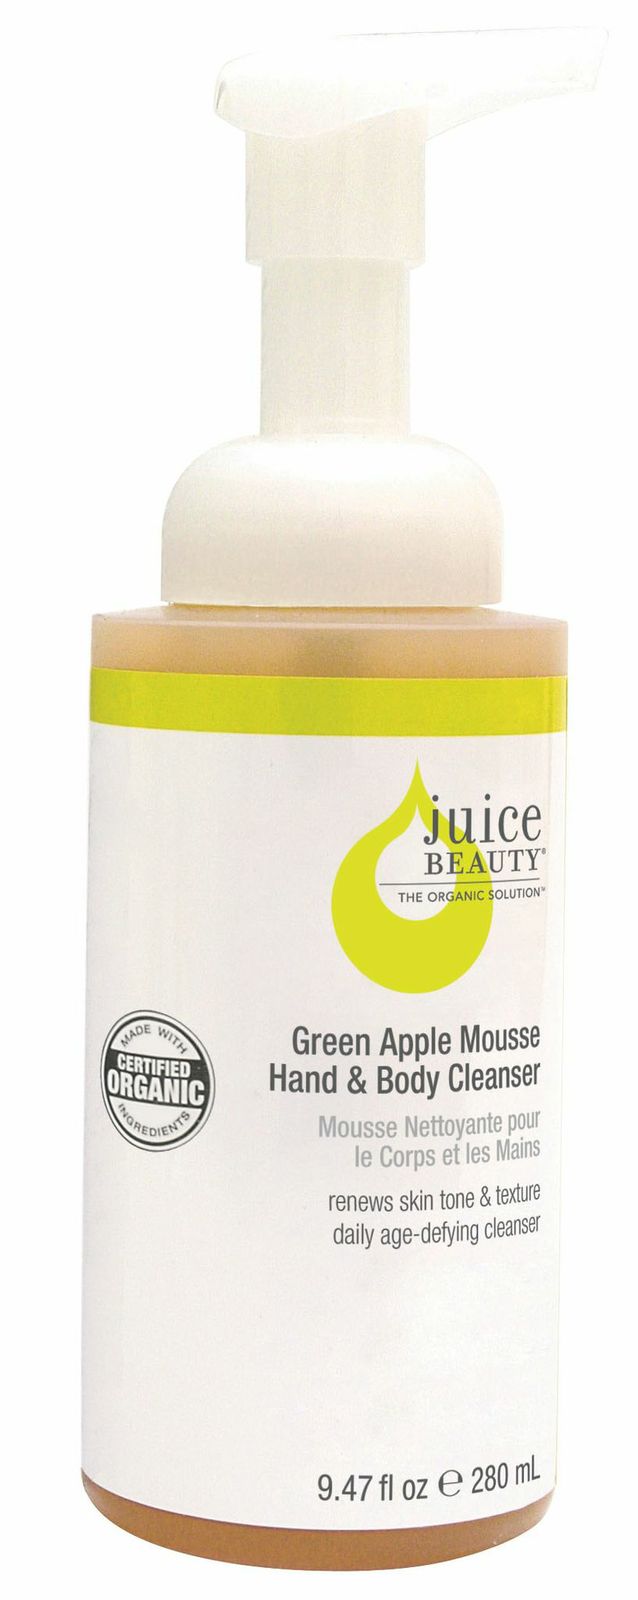 Juice Beauty Green Apple Mousse Hand & Body Cleanser